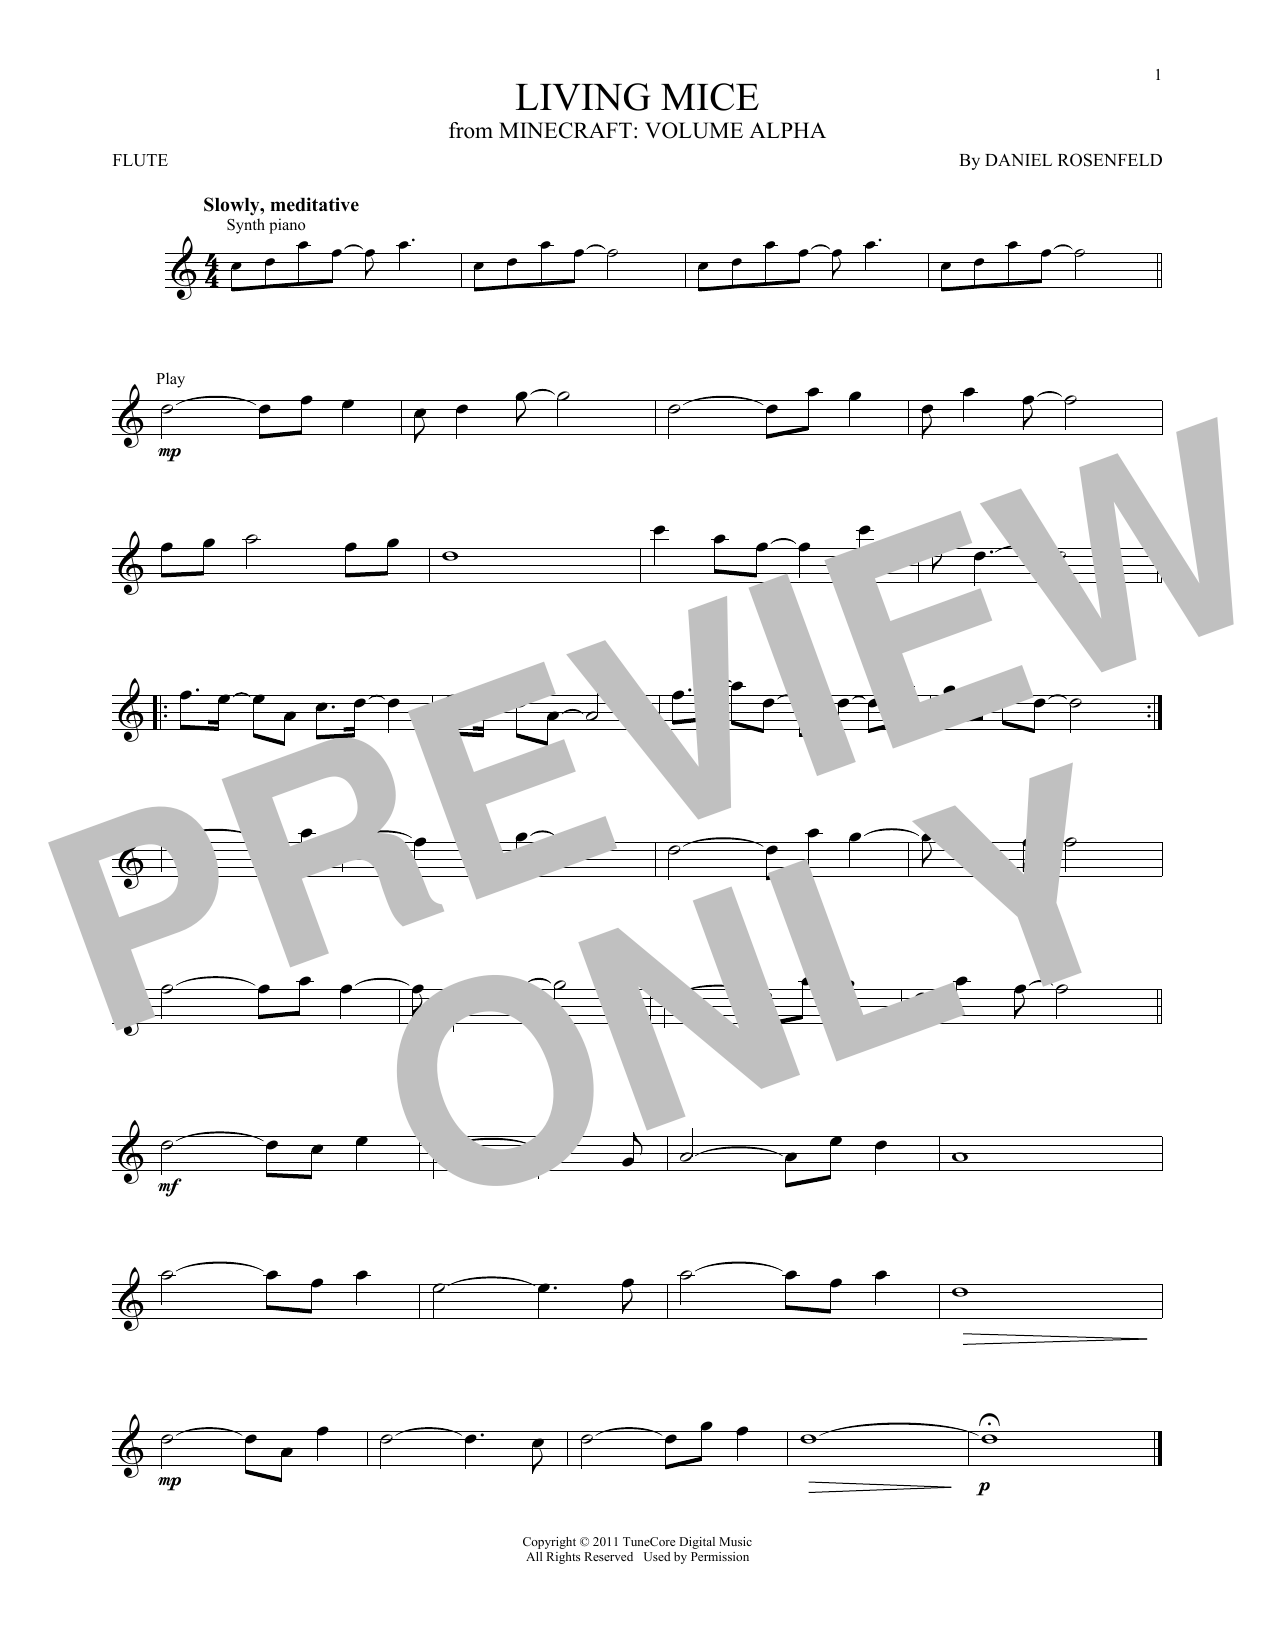 Download C418 Living Mice (from Minecraft) Sheet Music